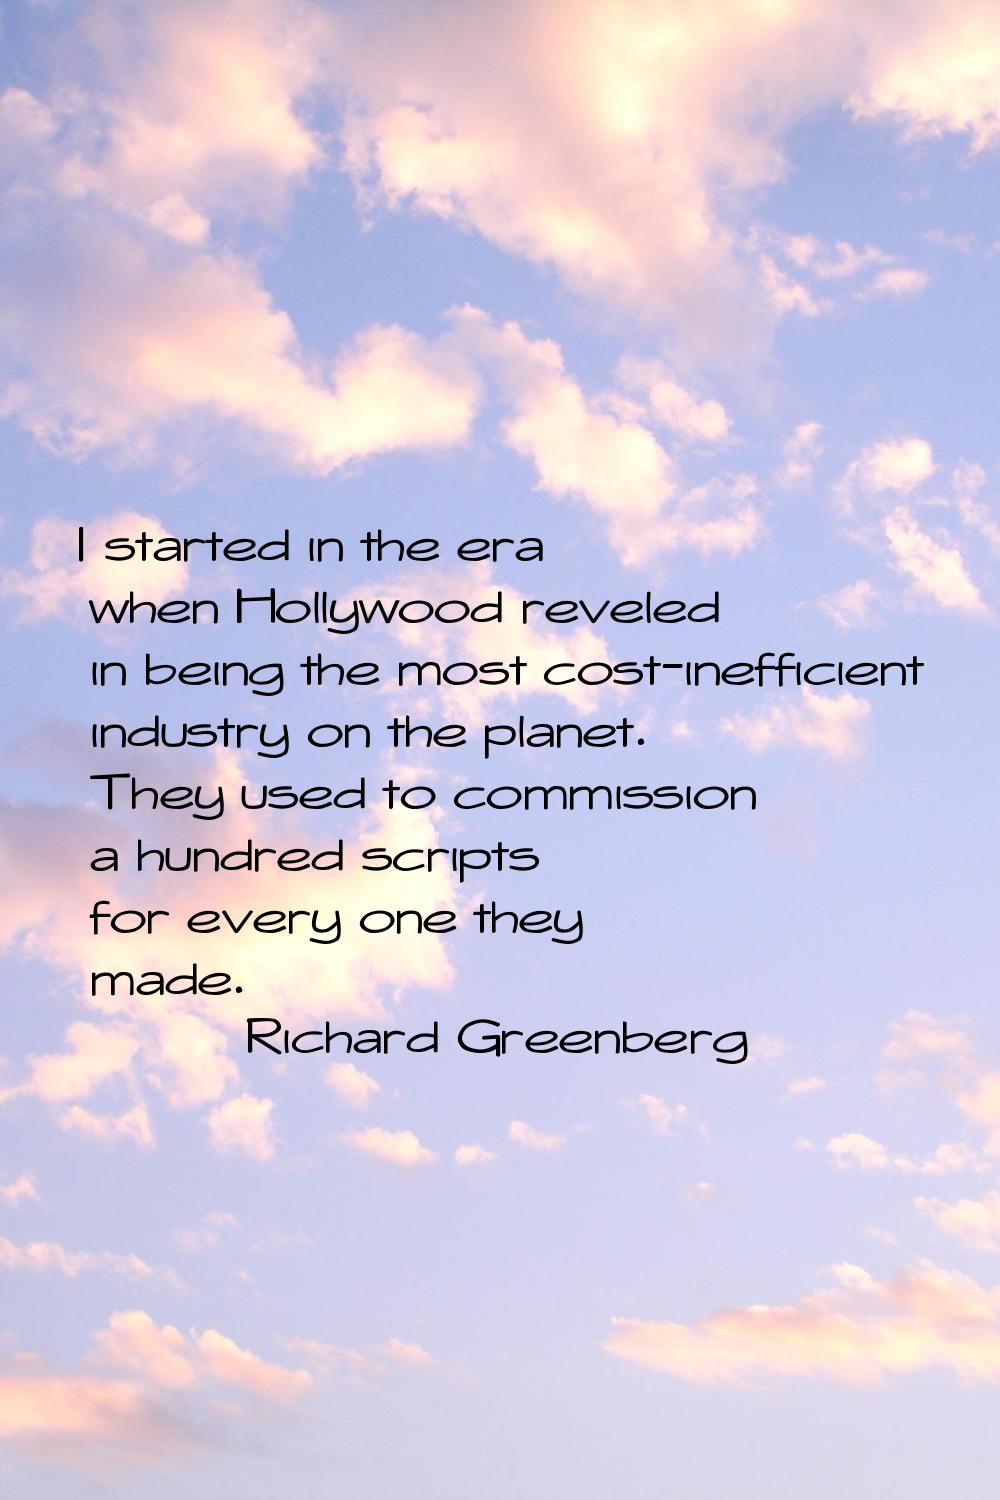 I started in the era when Hollywood reveled in being the most cost-inefficient industry on the plan